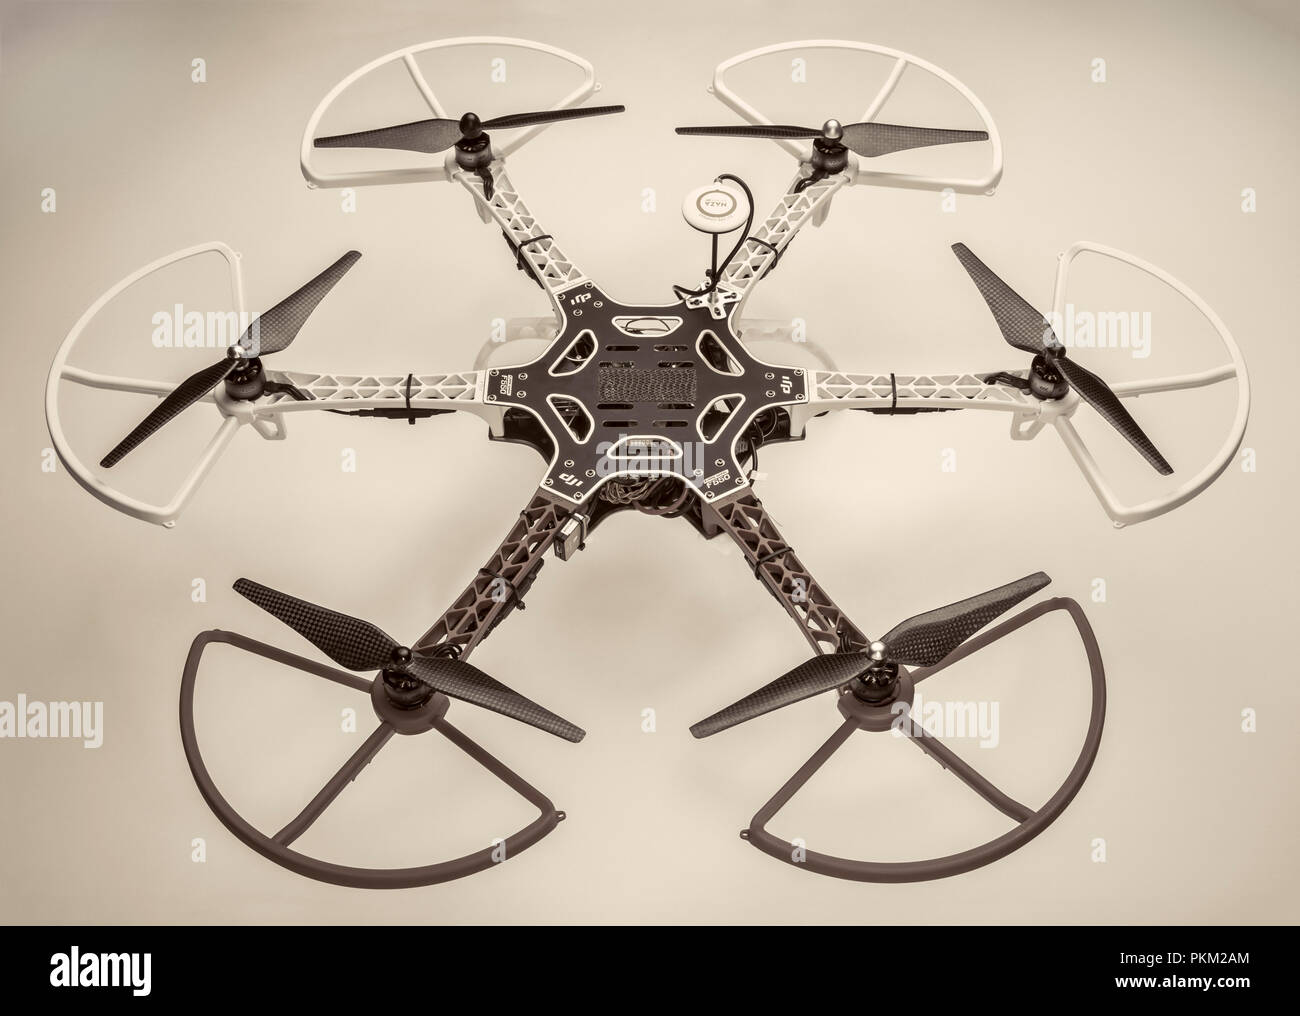 FORT COLLINS, CO, USA, December 13, 2014: Radio controlled DJI F550 Flame  Wheel hexacopter drone with propeller guards. This drone is assembled fr  Stock Photo - Alamy